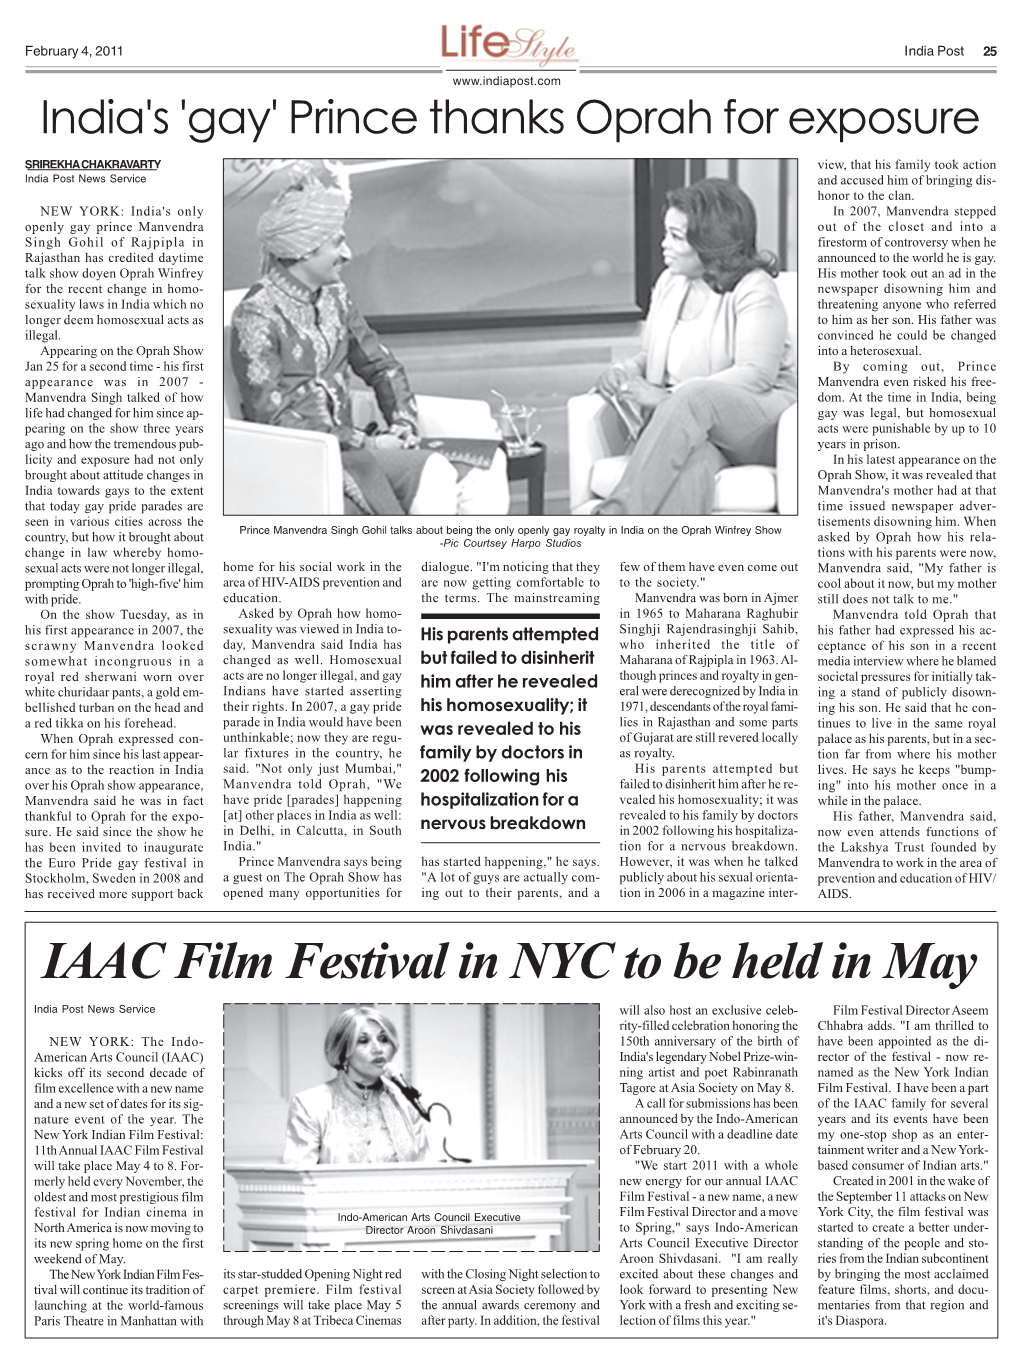 IAAC Film Festival in NYC to Be Held in May